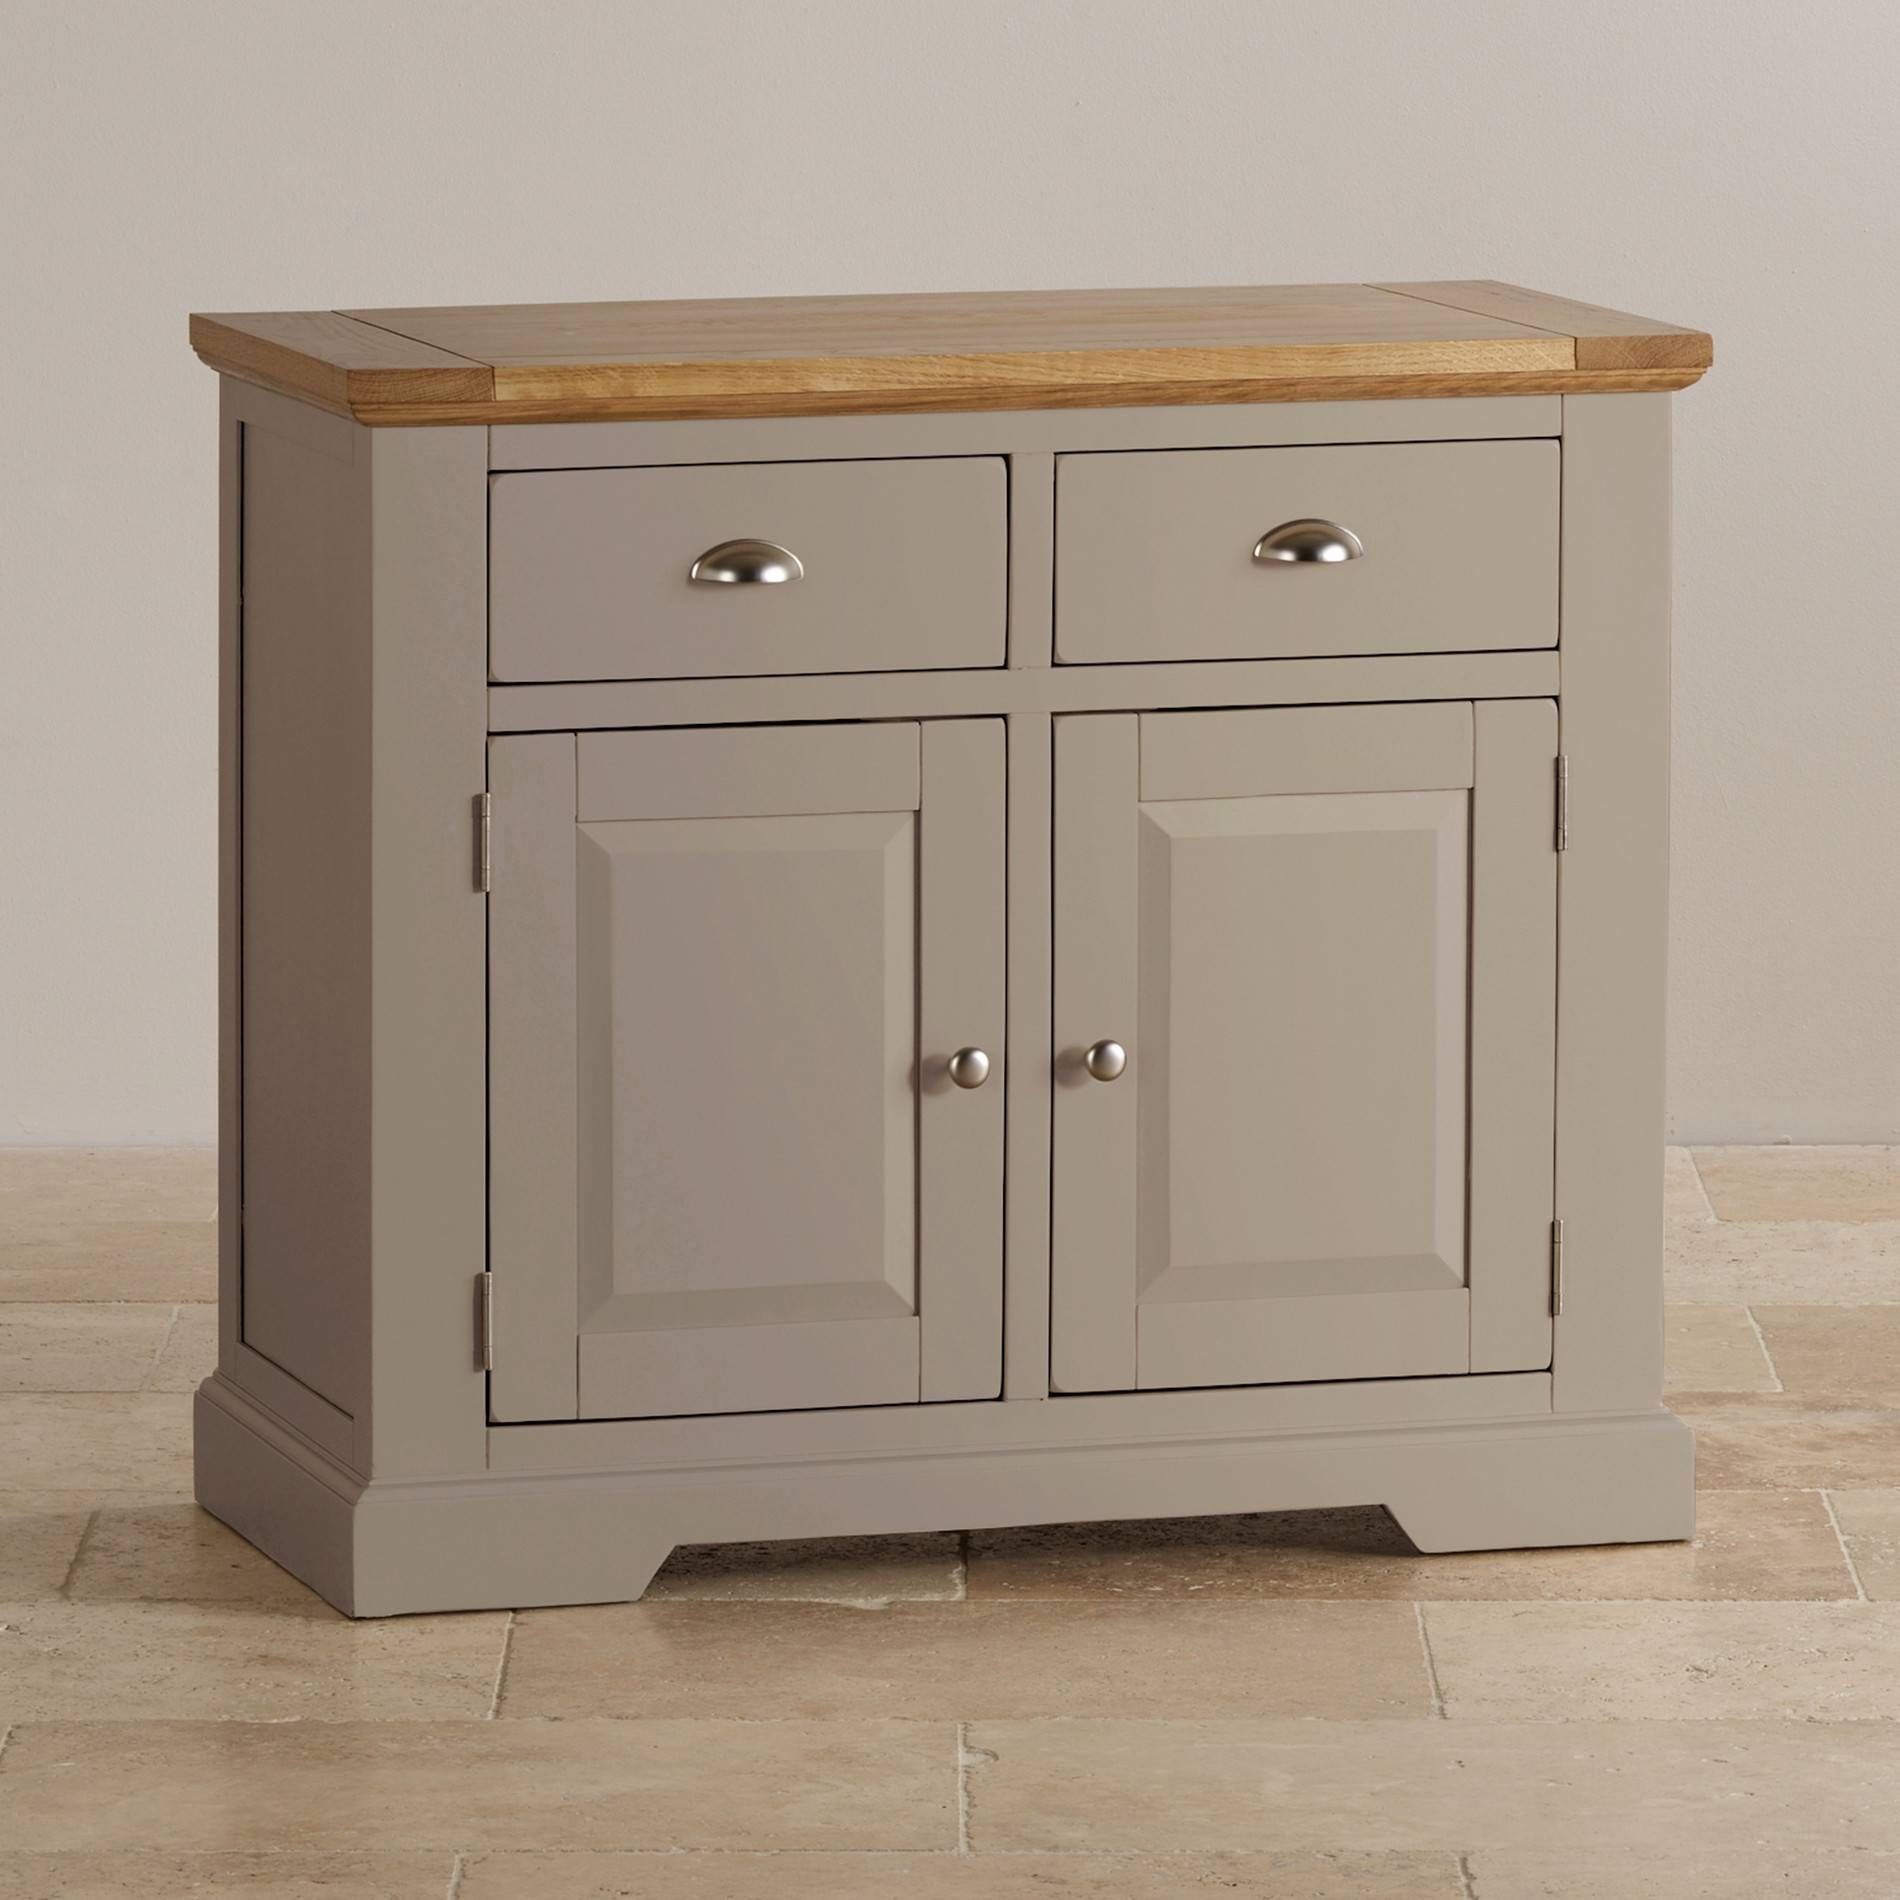 Sideboards | 100% Solid Hardwood | Oak Furniture Land Throughout Small Sideboards Cabinets (View 13 of 20)